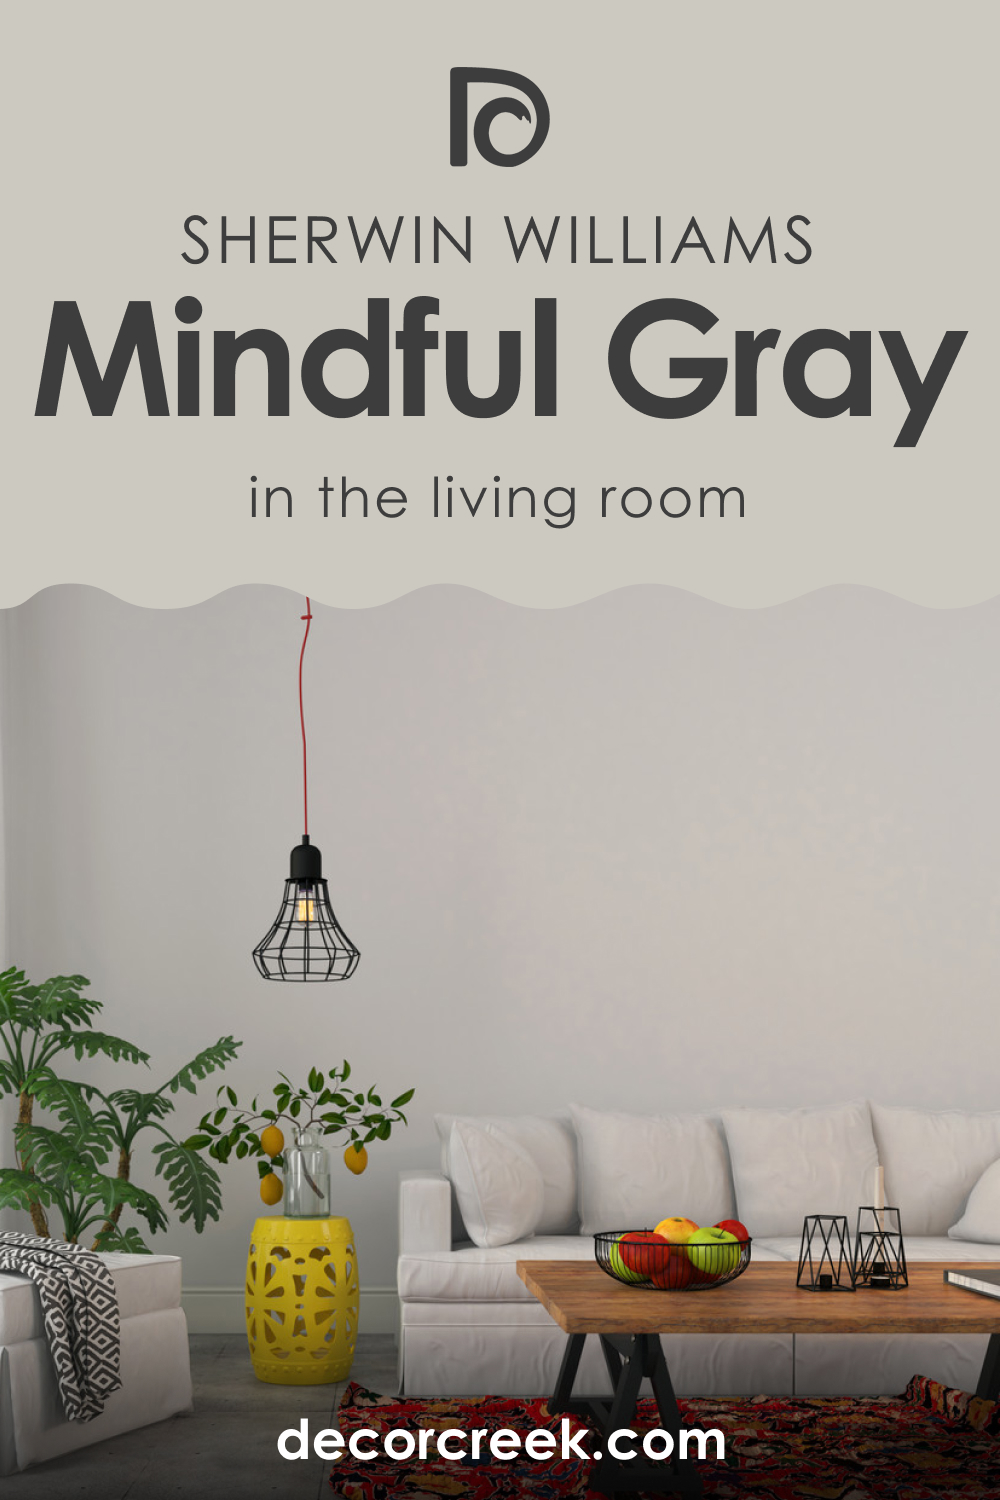 How to Use SW 7016 Mindful Gray in the Living Room?